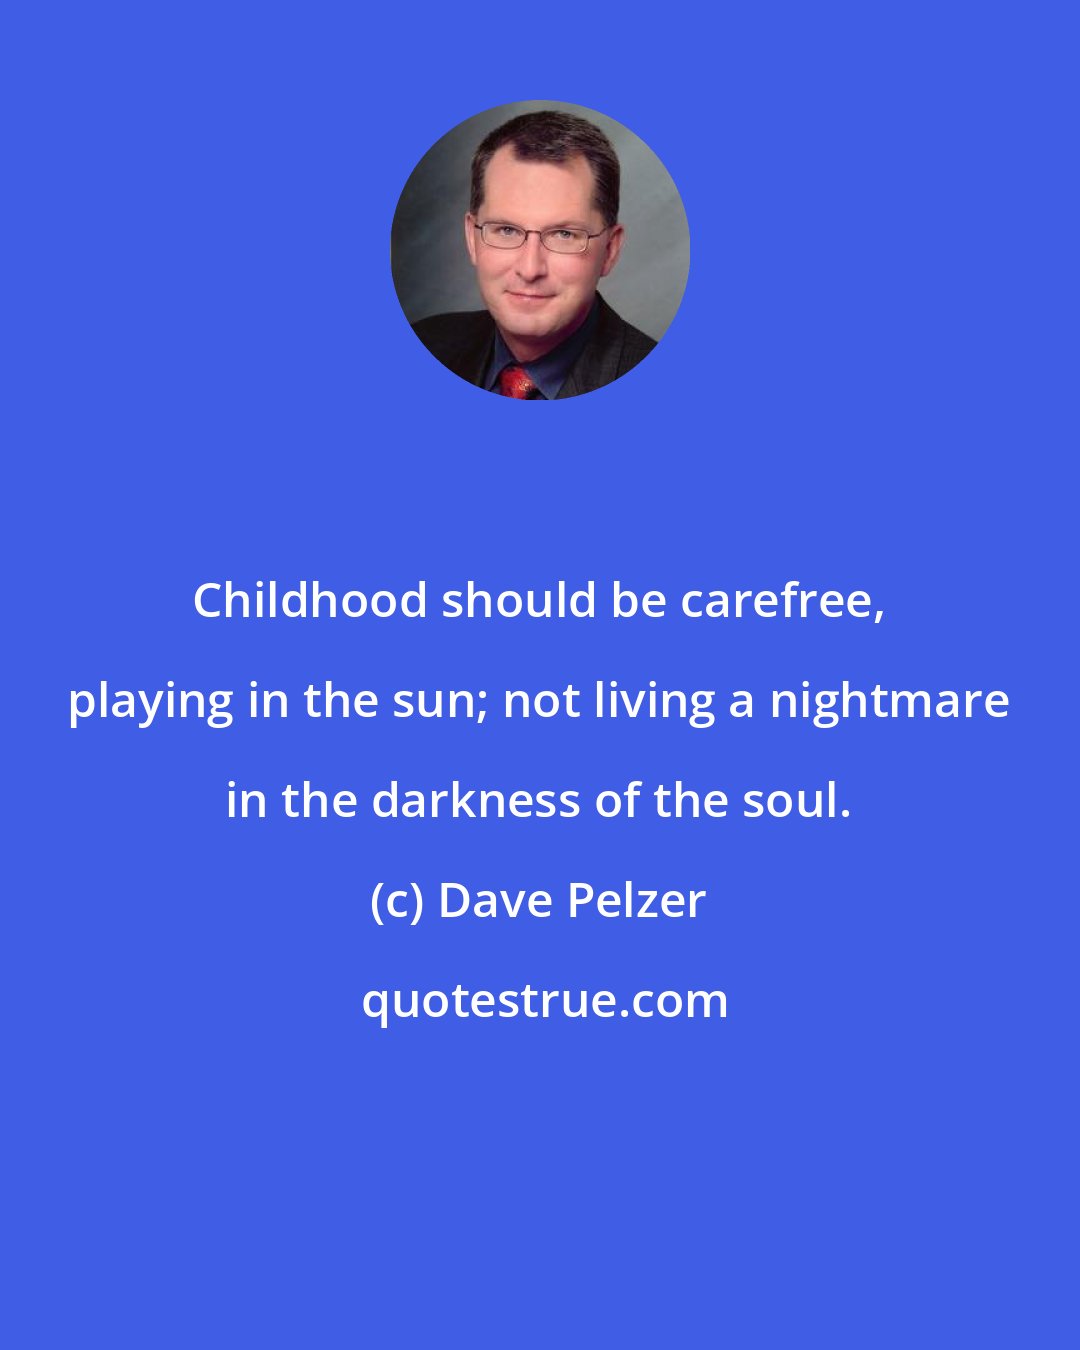 Dave Pelzer: Childhood should be carefree, playing in the sun; not living a nightmare in the darkness of the soul.